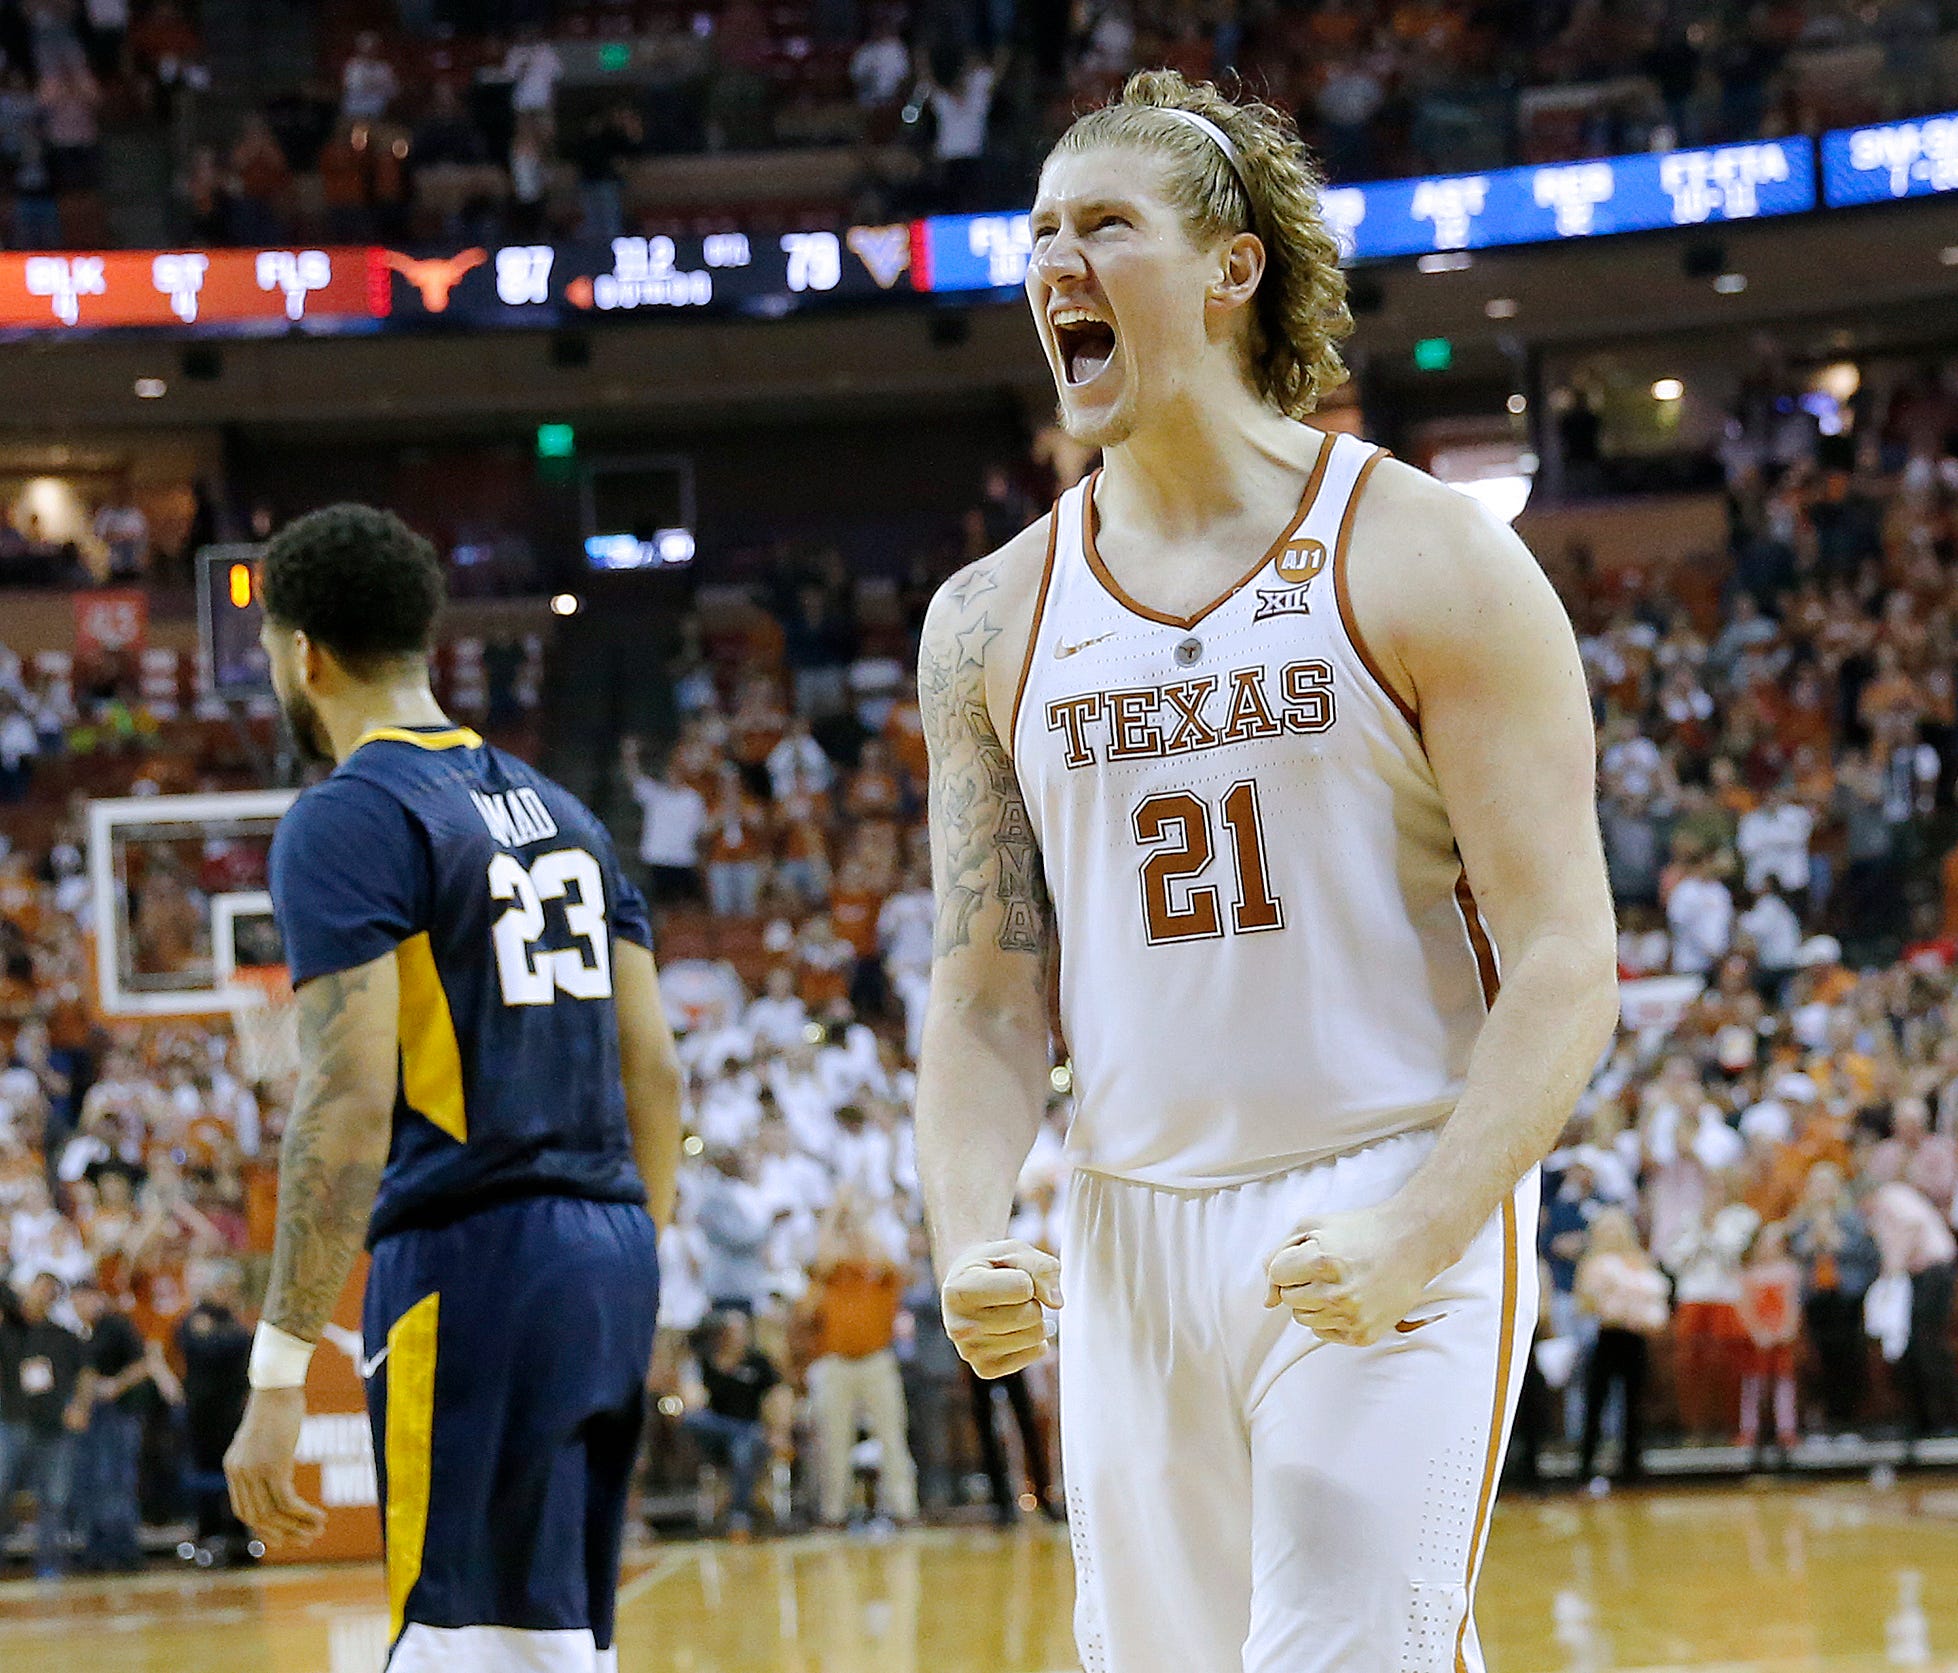 Dylan Osetkowski of the Texas Longhorns reacts as his team defeats the West Virginia Mountaineers 87-79 in overtime at the Frank Erwin Center on March 3, 2018 in Austin, Texas.